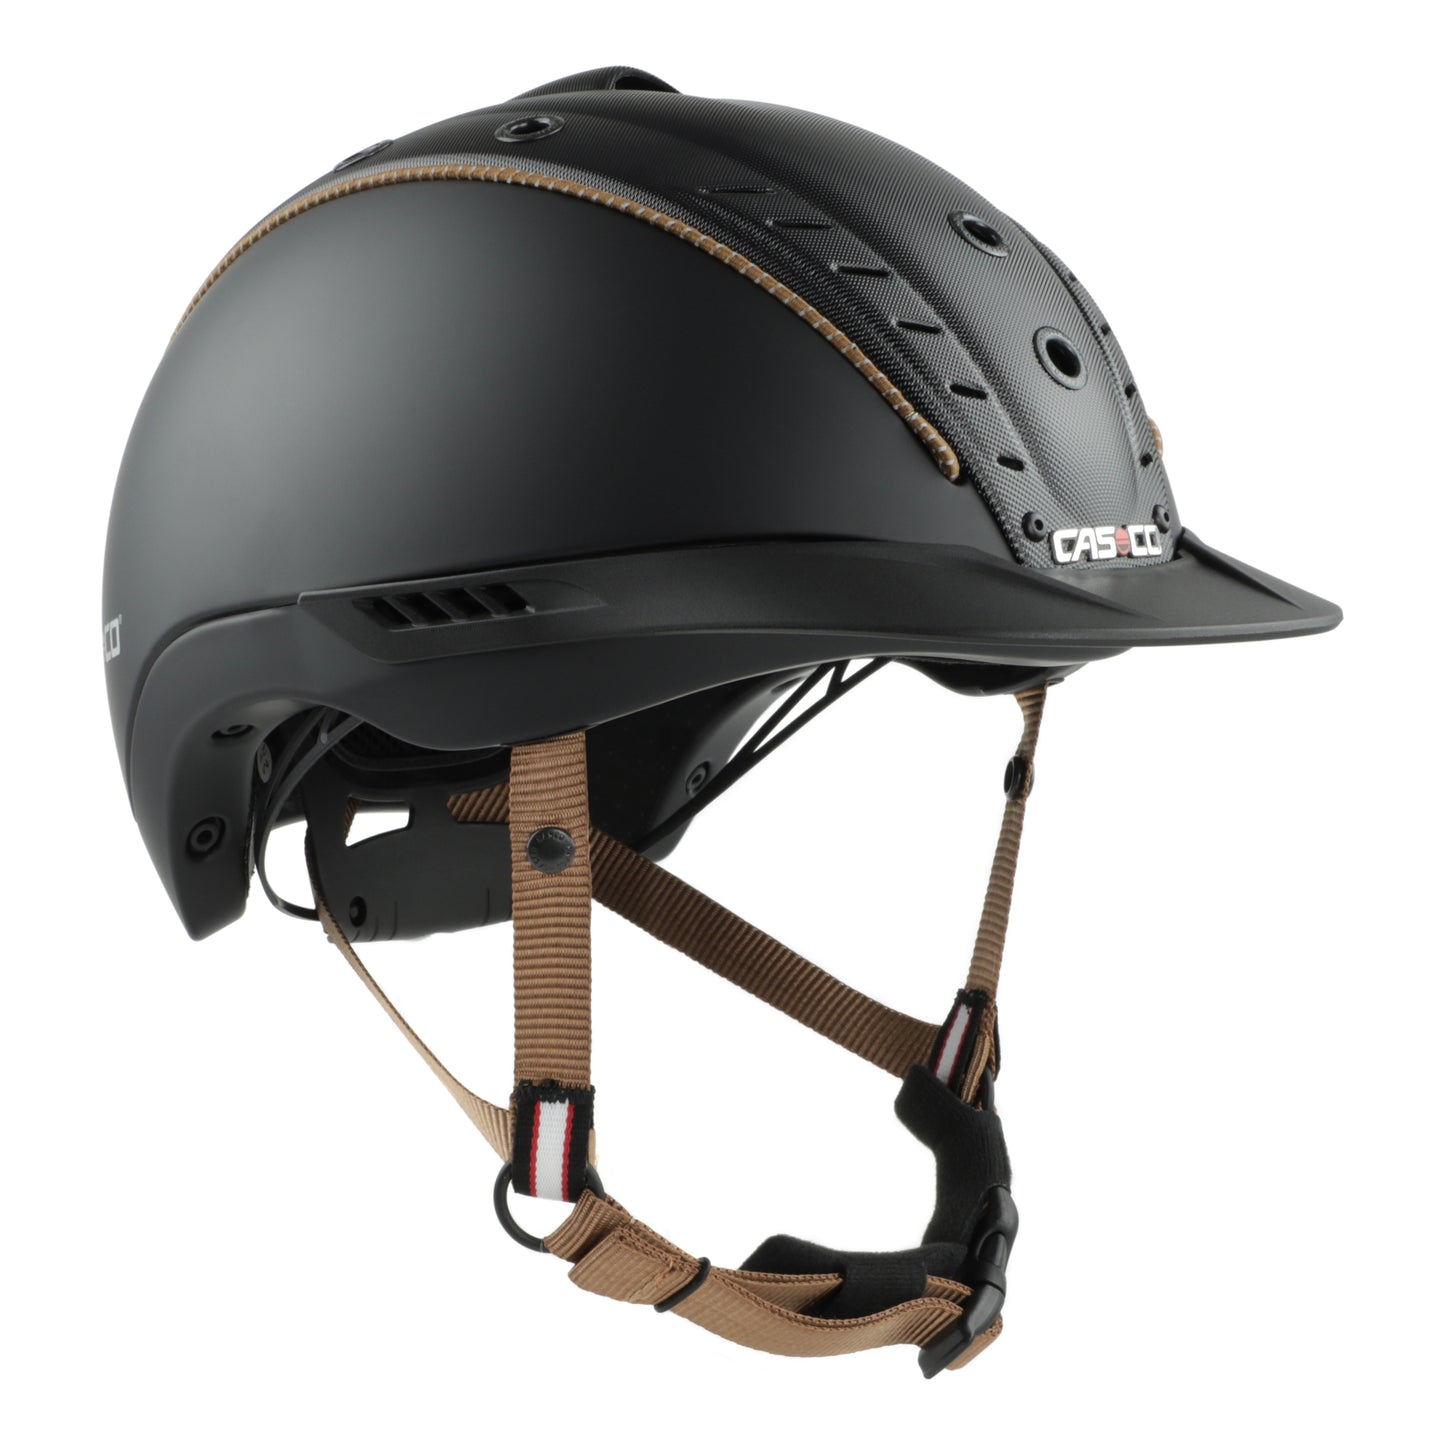 Casco Mistrall-2 LIMITED EDITION black structure